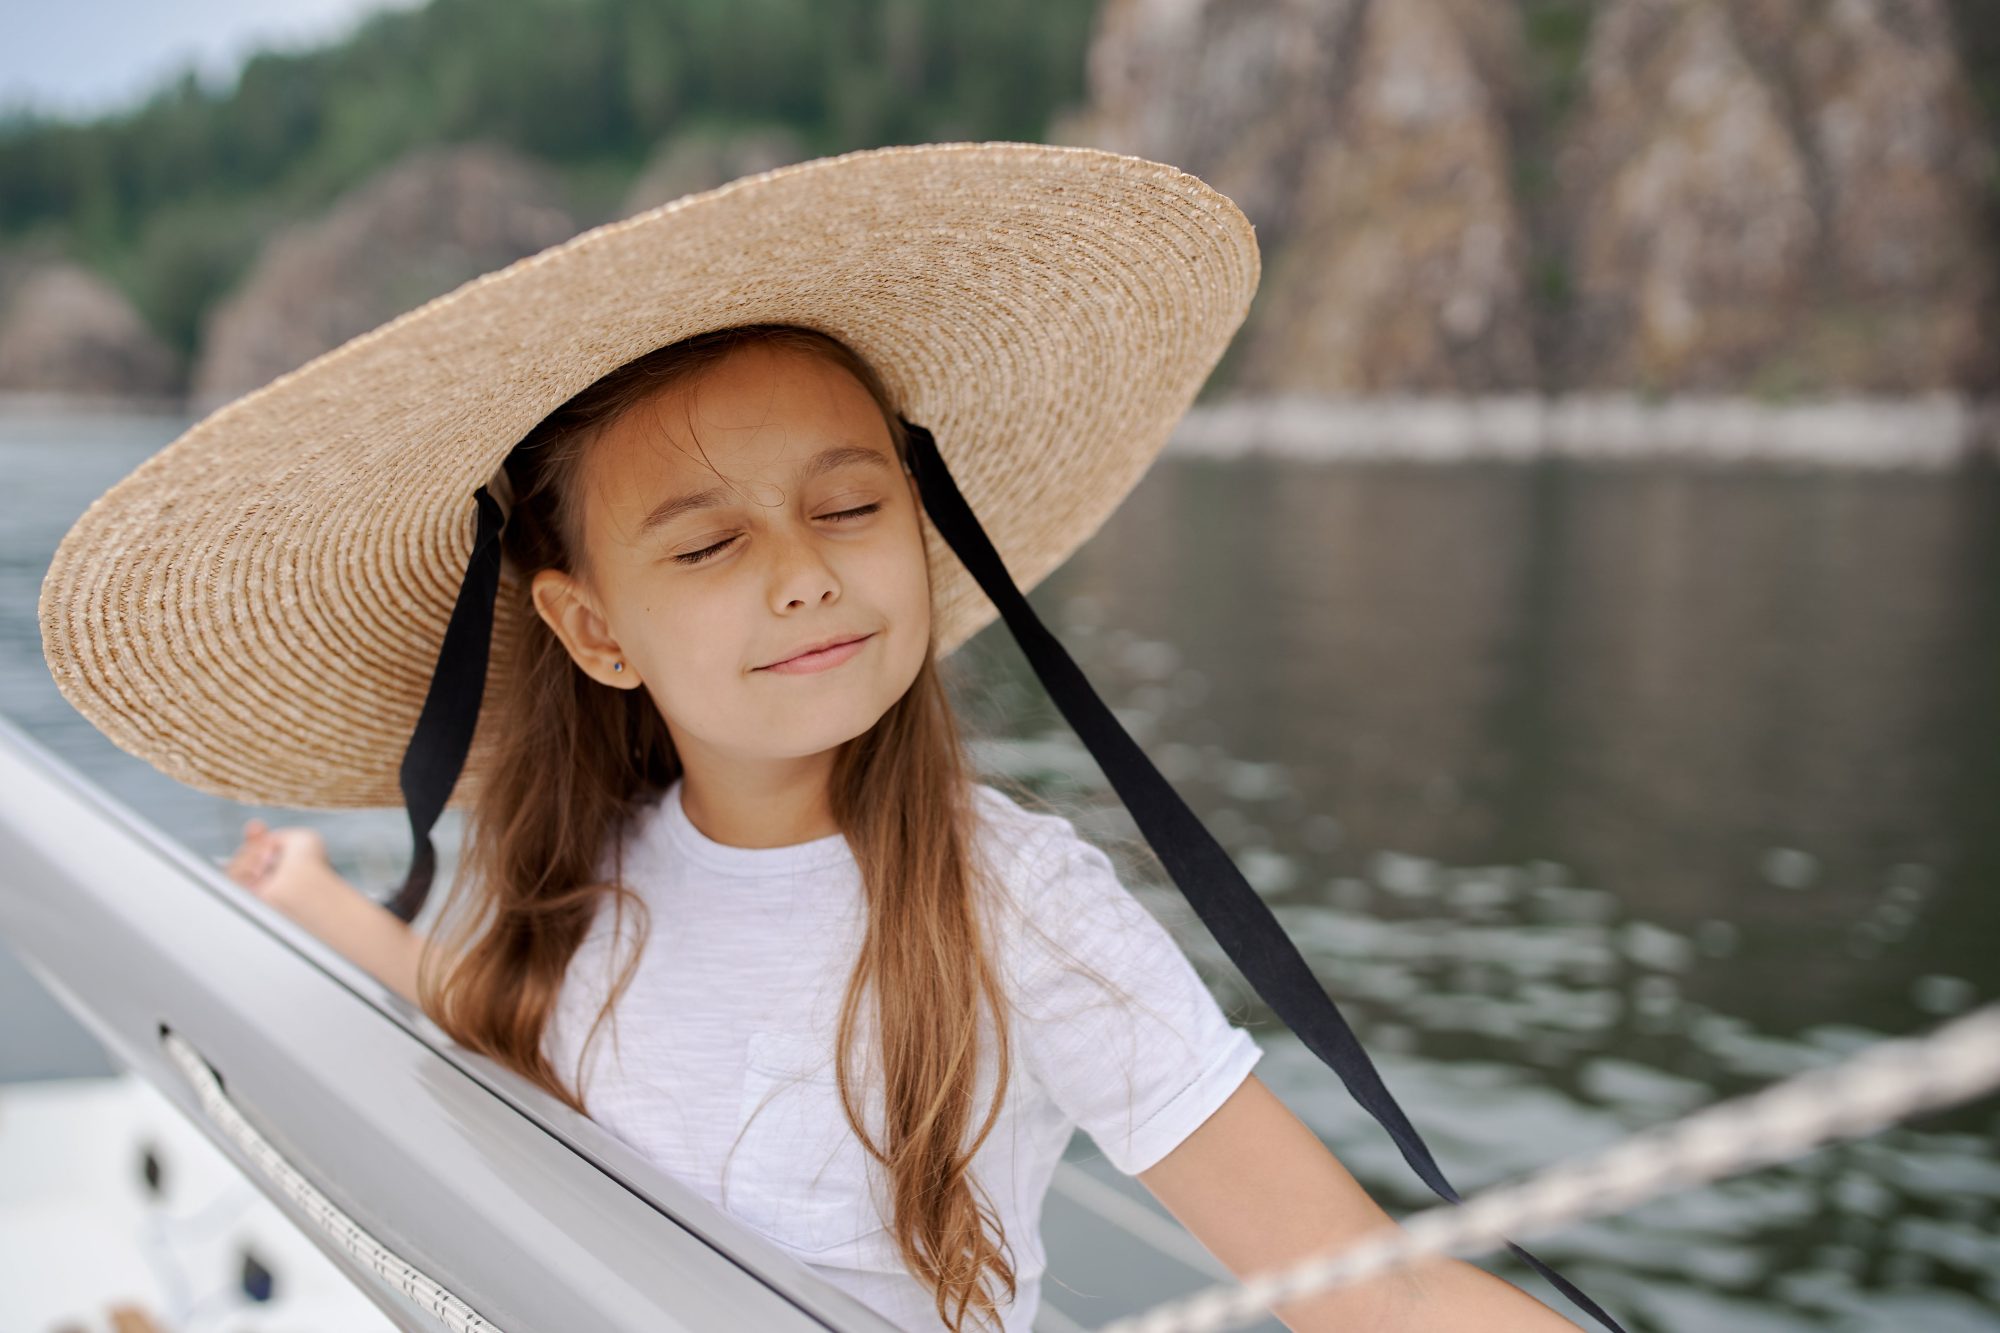 Set sail for success with a superyacht nanny for your little ones